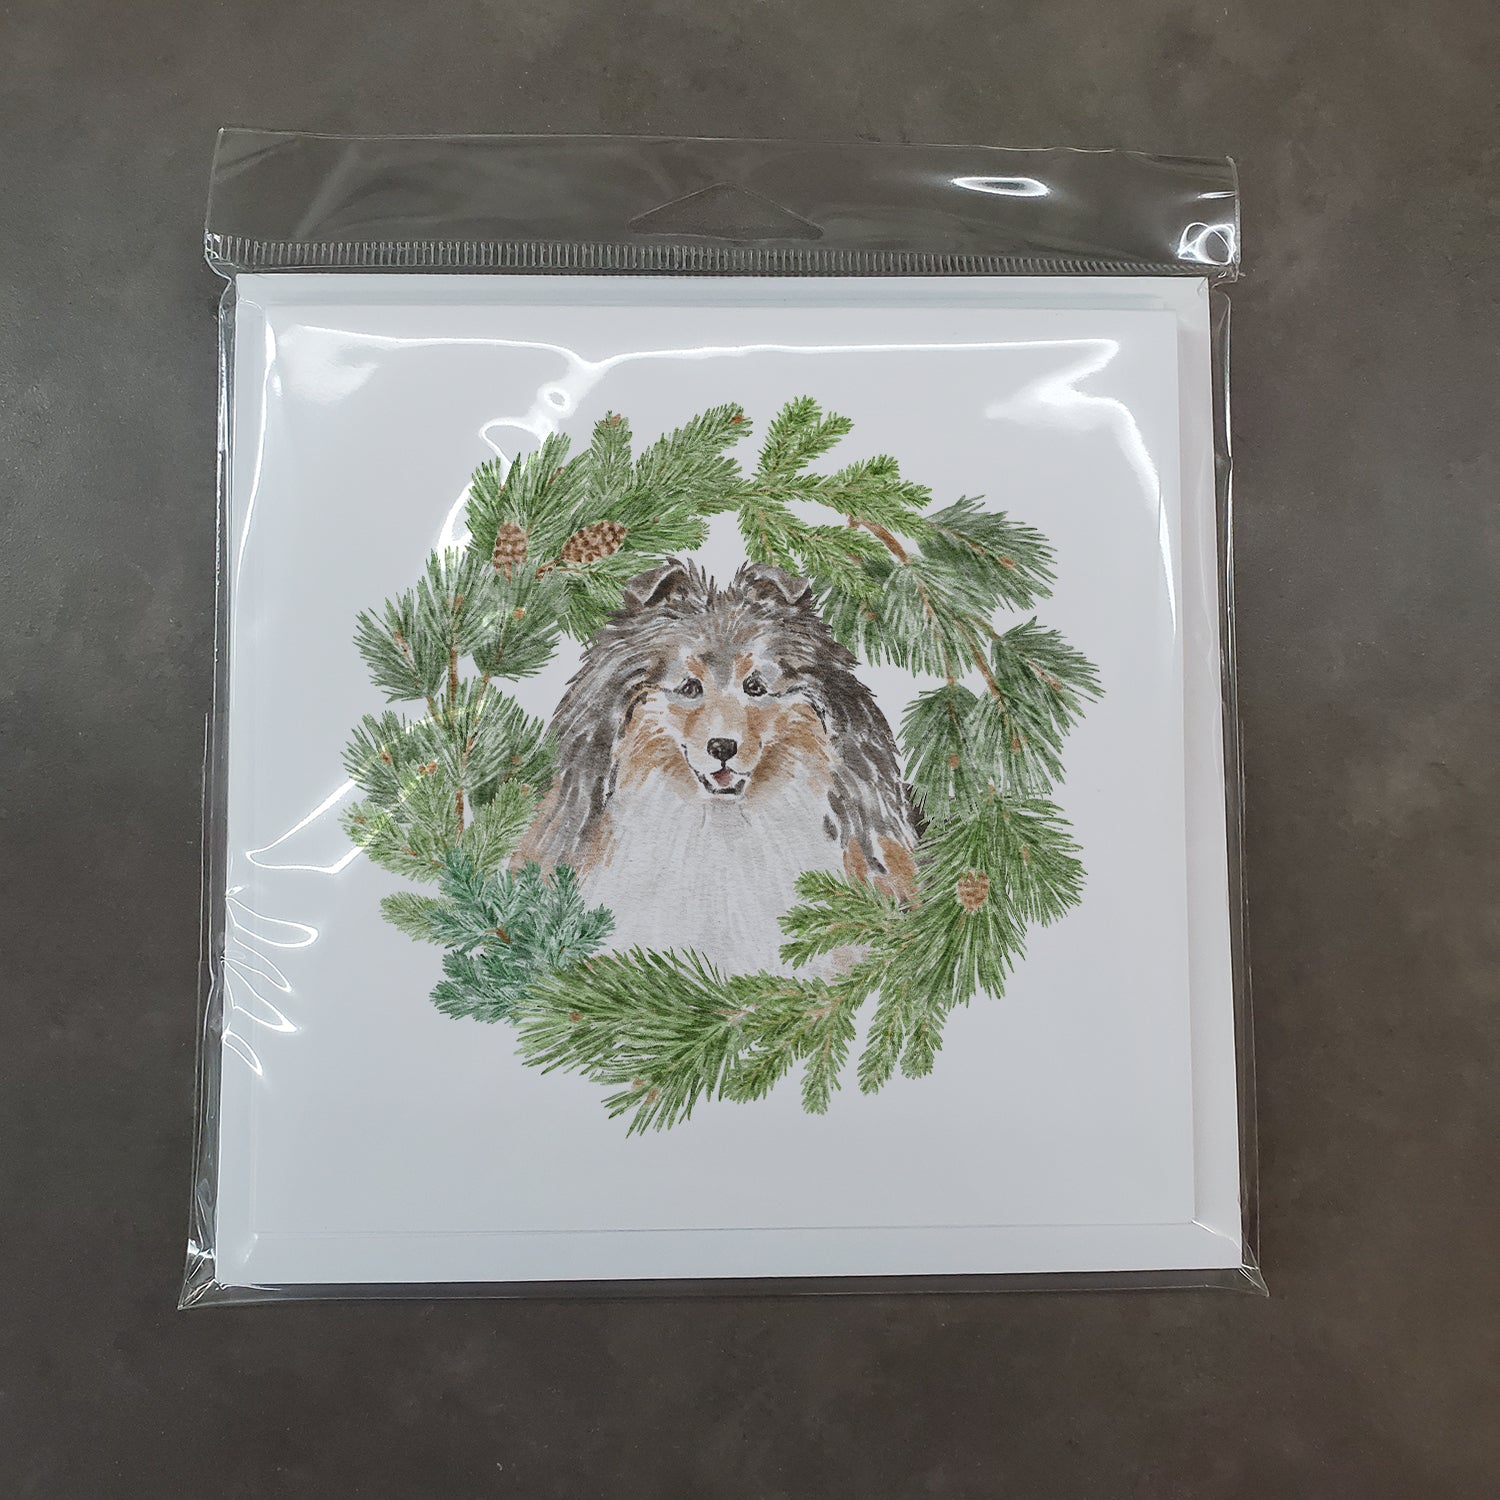 Sheltie/Shetland Sheepdog Tricolor Smiling #1 with Christmas Wreath Square Greeting Cards and Envelopes Pack of 8 - the-store.com